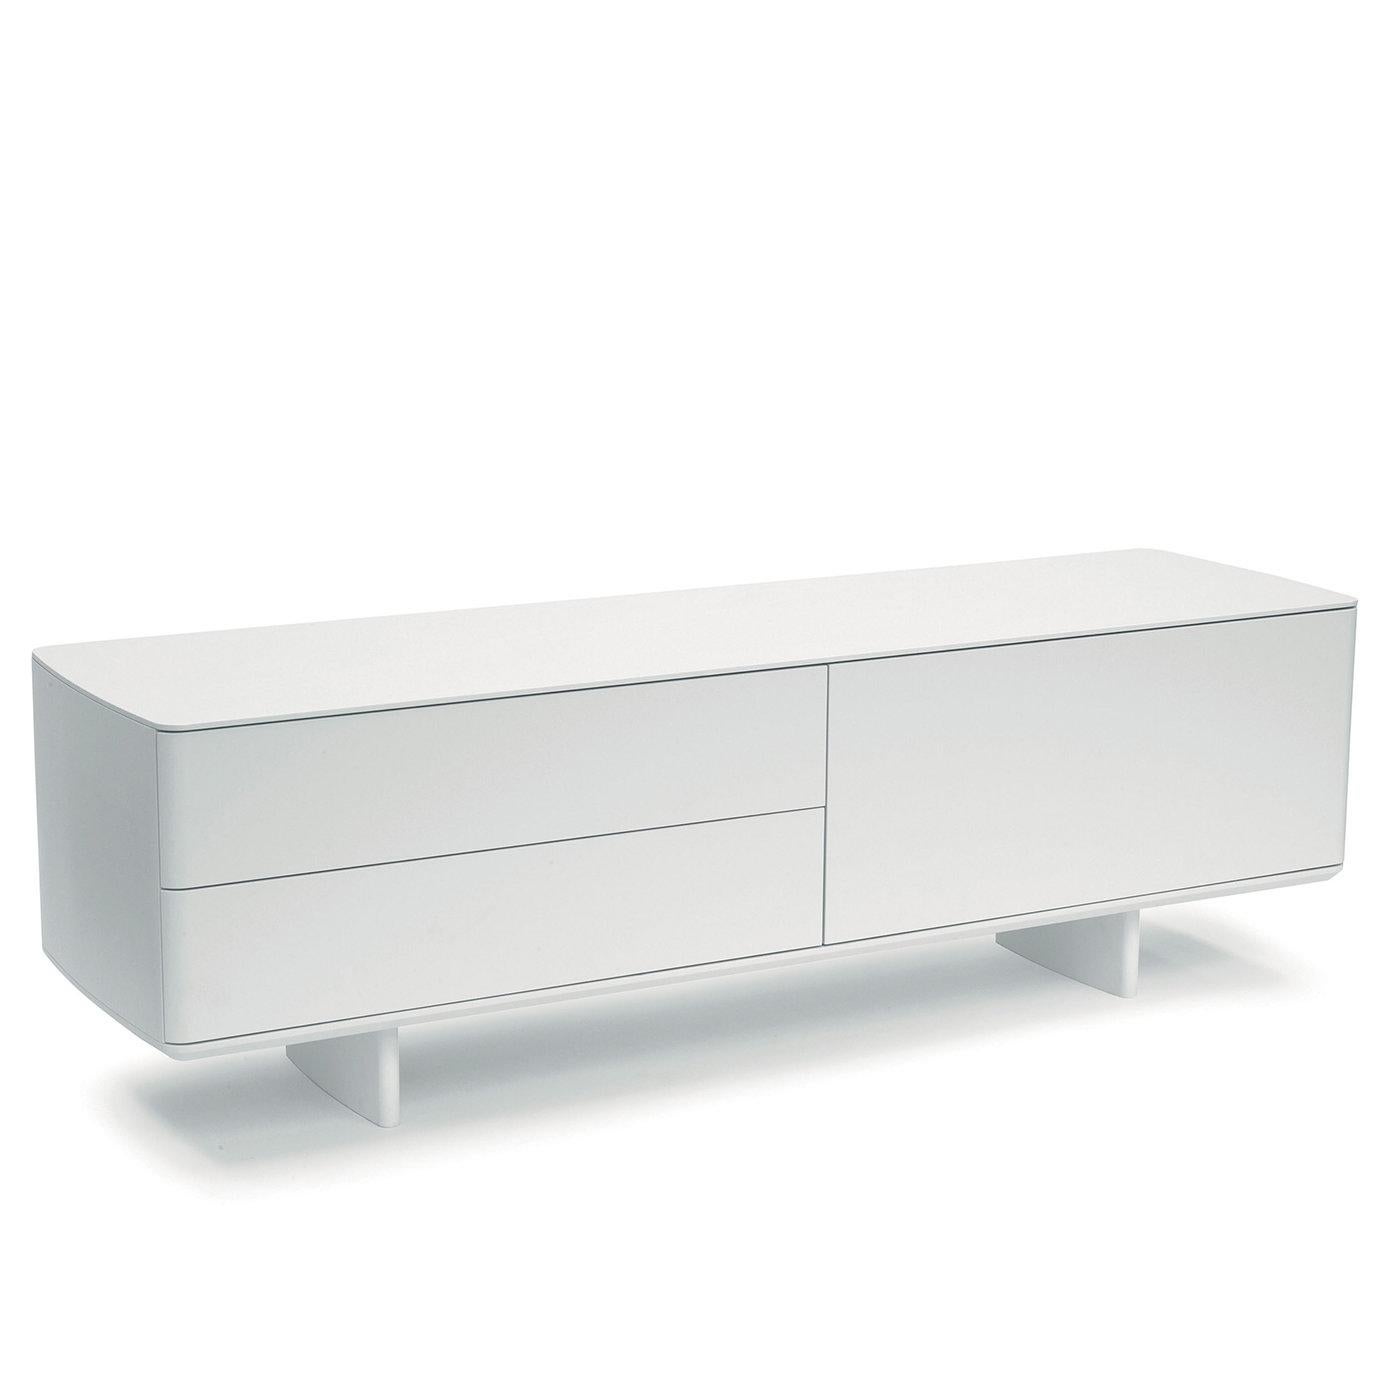 Fluid lines and ethereal flair merge in this outstanding, all-white wooden sideboard which will superbly complement residential or business interiors alike. Raised on a minimalist base in matte white Cristalplant® - sustainable material appreciated